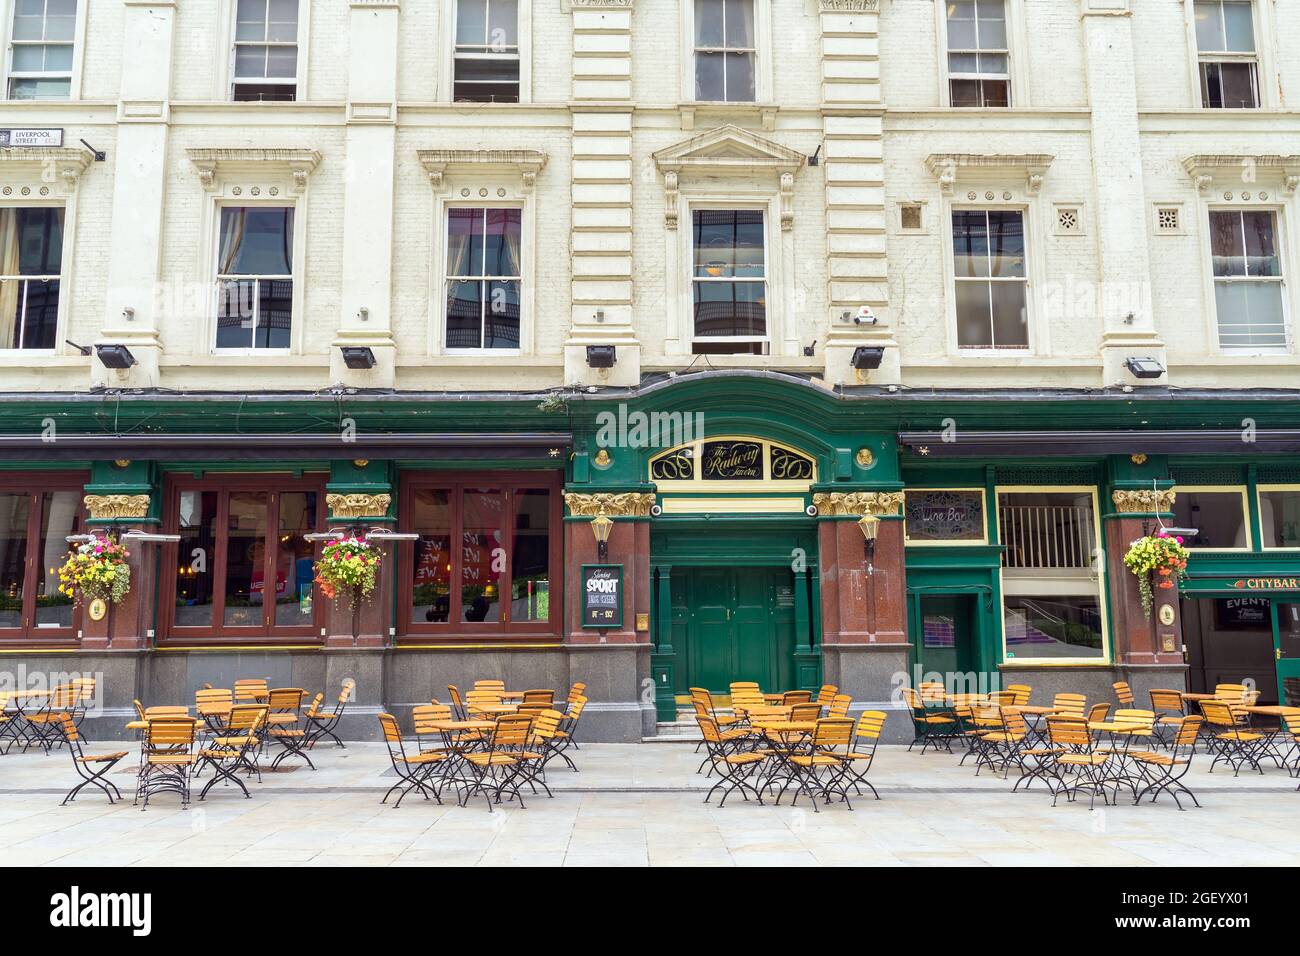 The exterior of The Railway Tavern in the City of London with empty chairs and dining tables outside. London - 22nd August 2021 Stock Photo